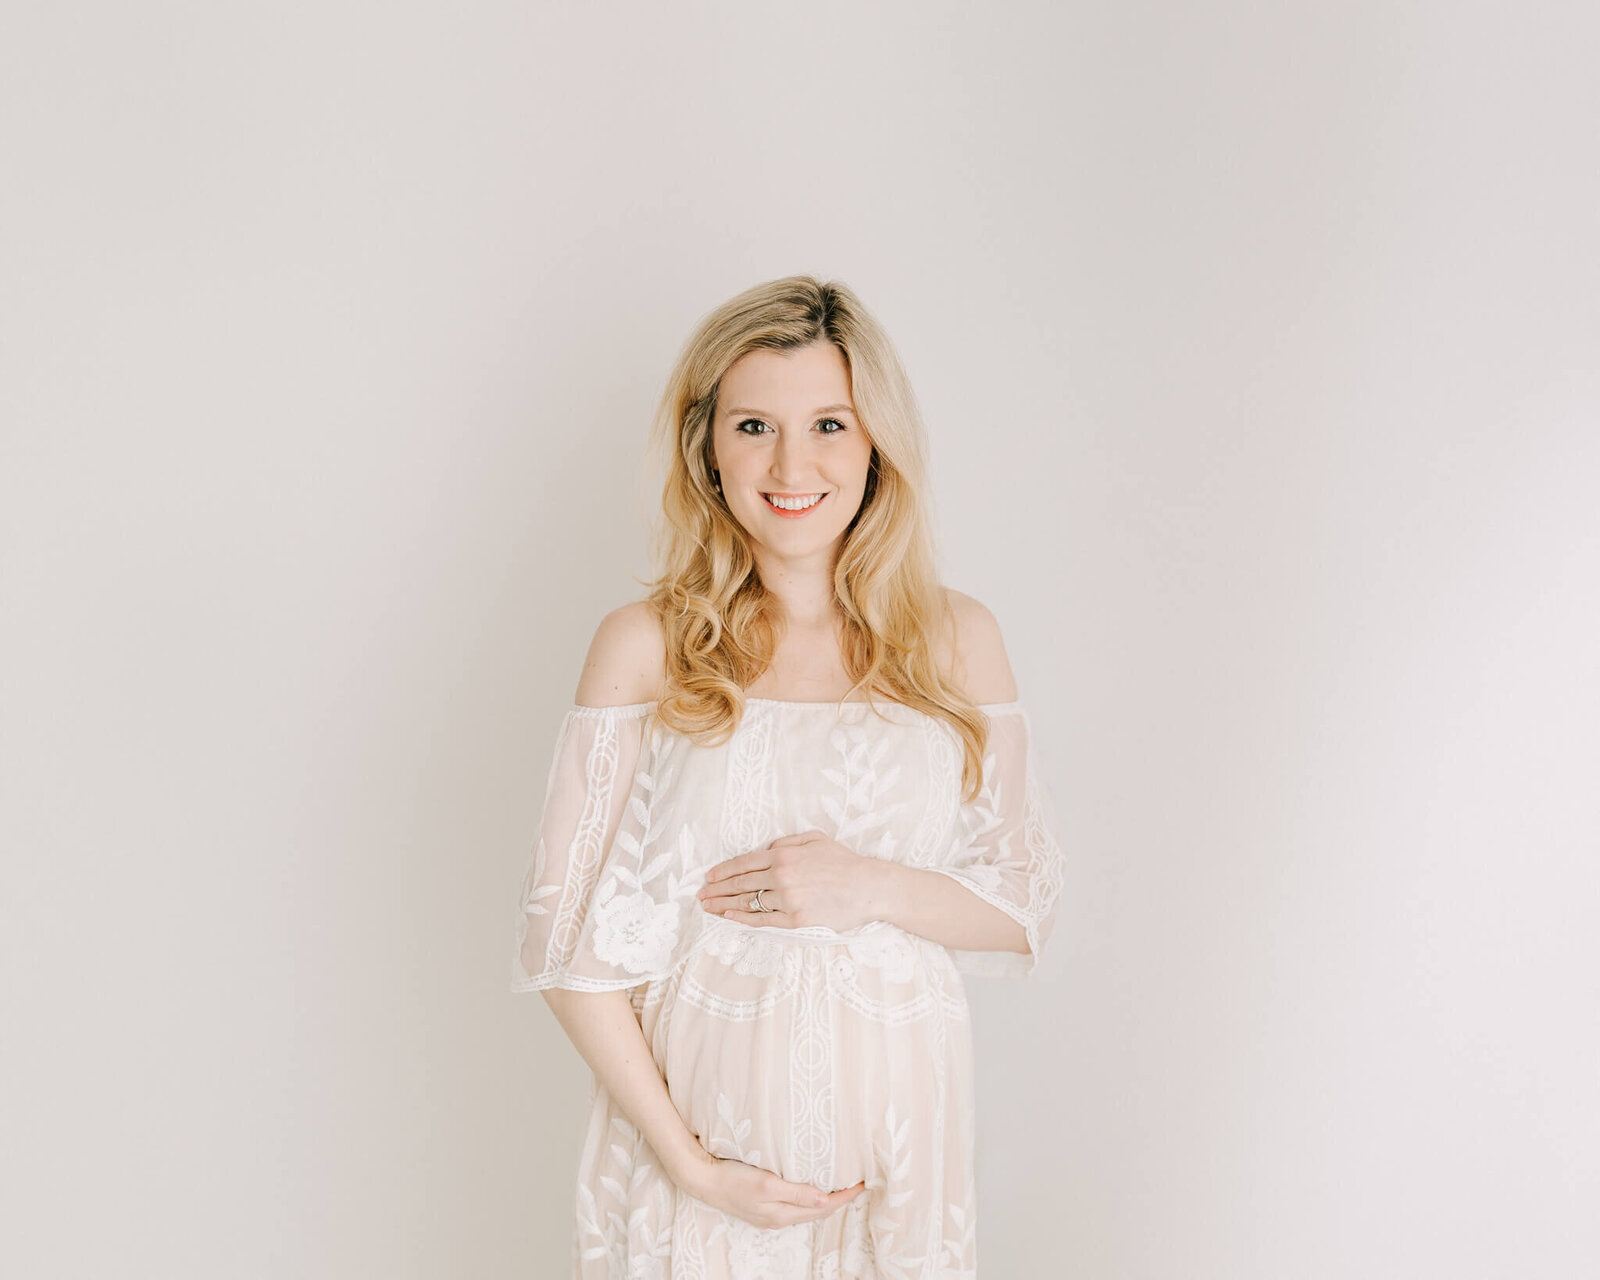 Expecting Mom in cream dress cradling her baby bump at Maternity session with Molly Berry Photography.